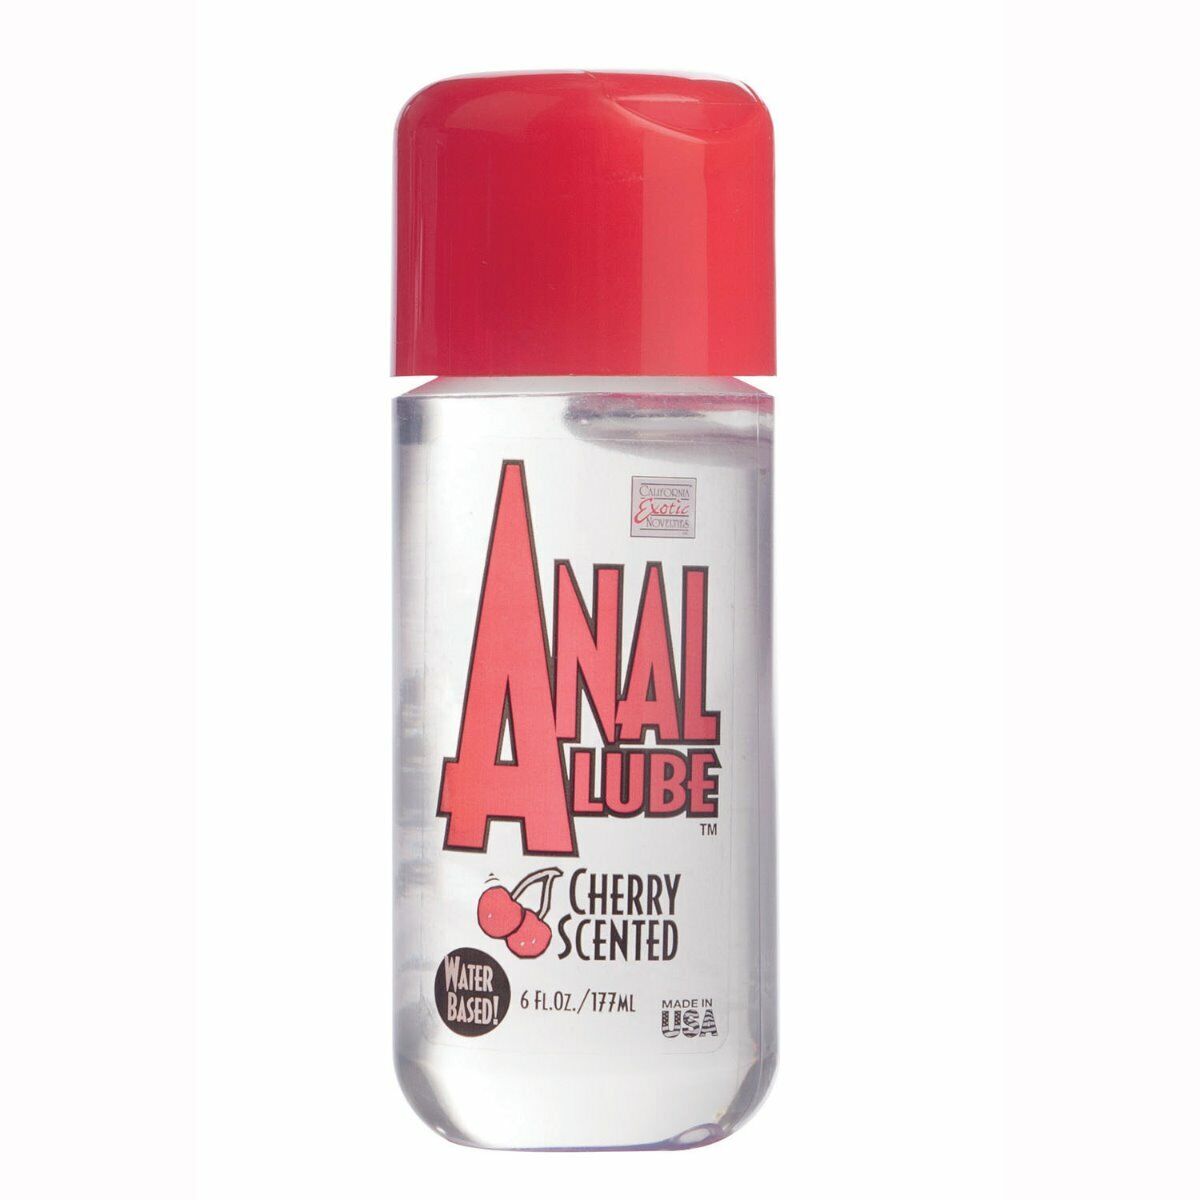 Orginal Formula Anal Lube Personal Lubricant Cherry Flavored Scented